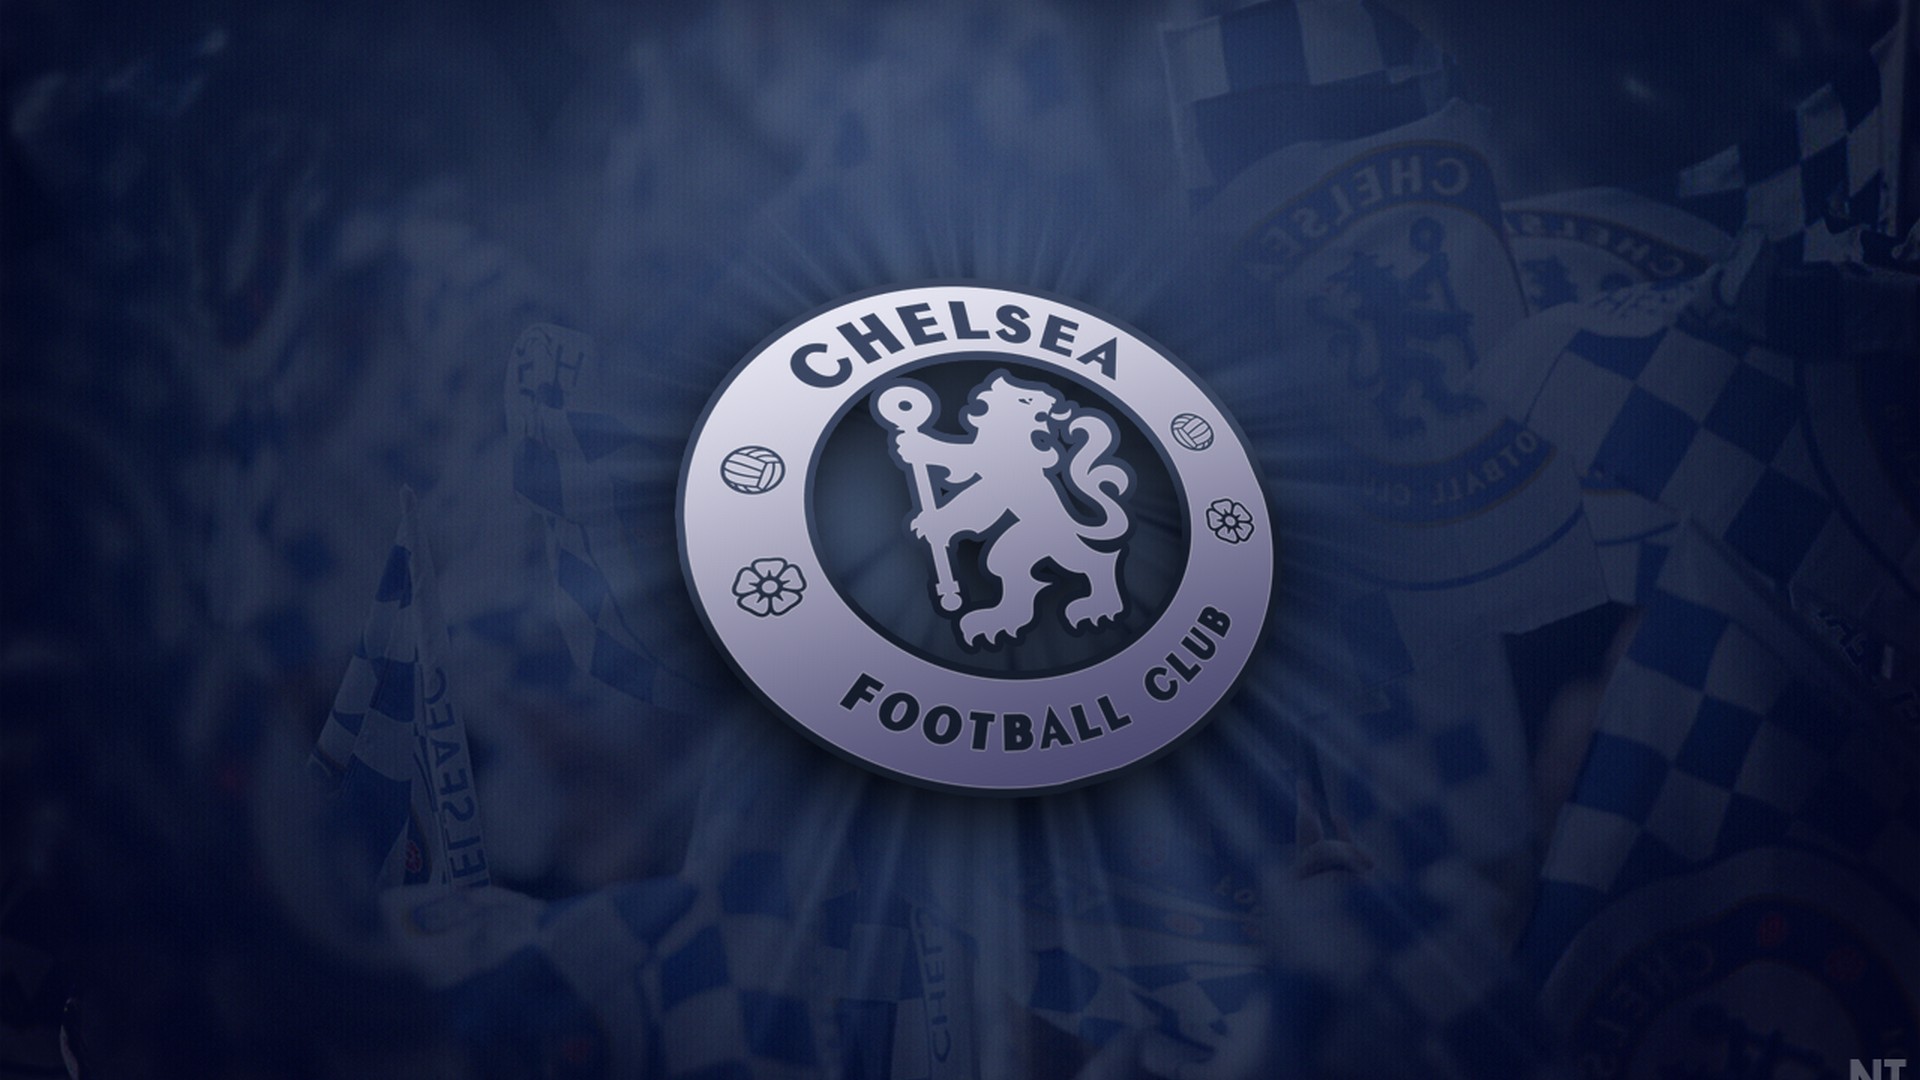 HD Chelsea Champions League Backgrounds With Resolution 1920X1080 pixel. You can make this wallpaper for your Mac or Windows Desktop Background, iPhone, Android or Tablet and another Smartphone device for free